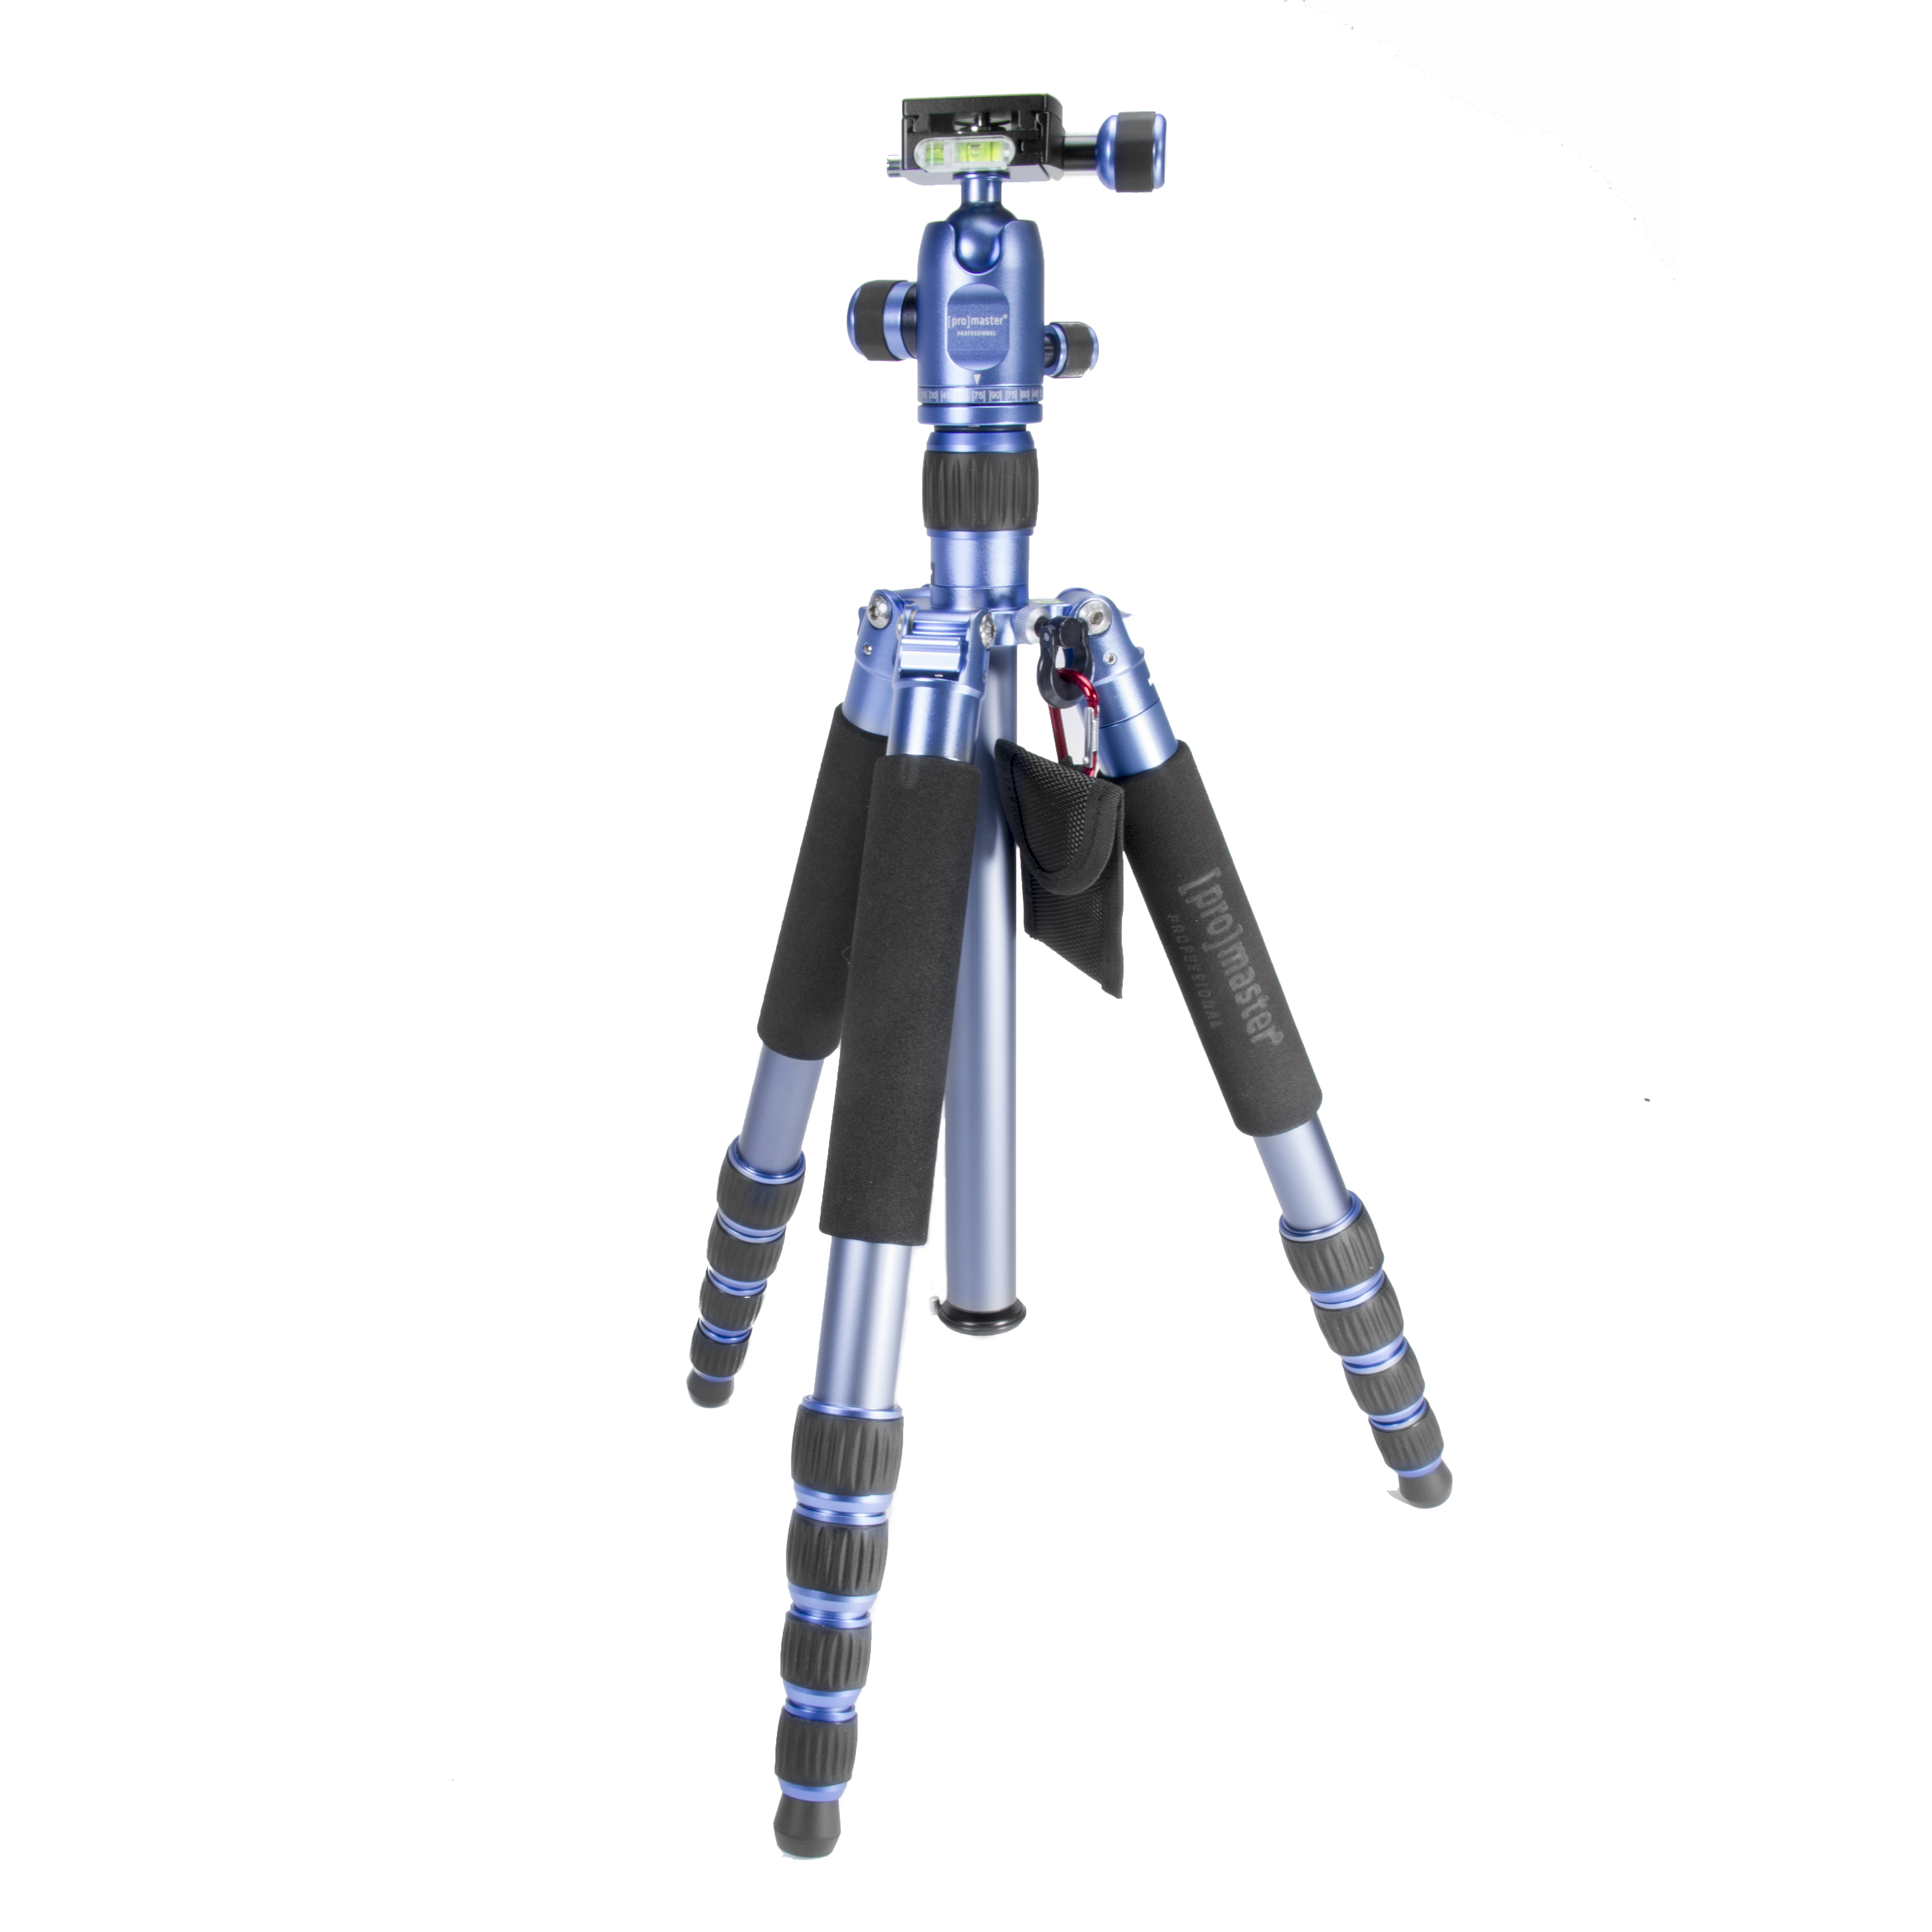 Promaster 2710 XC525 Professional Tripod with Head (Blue)